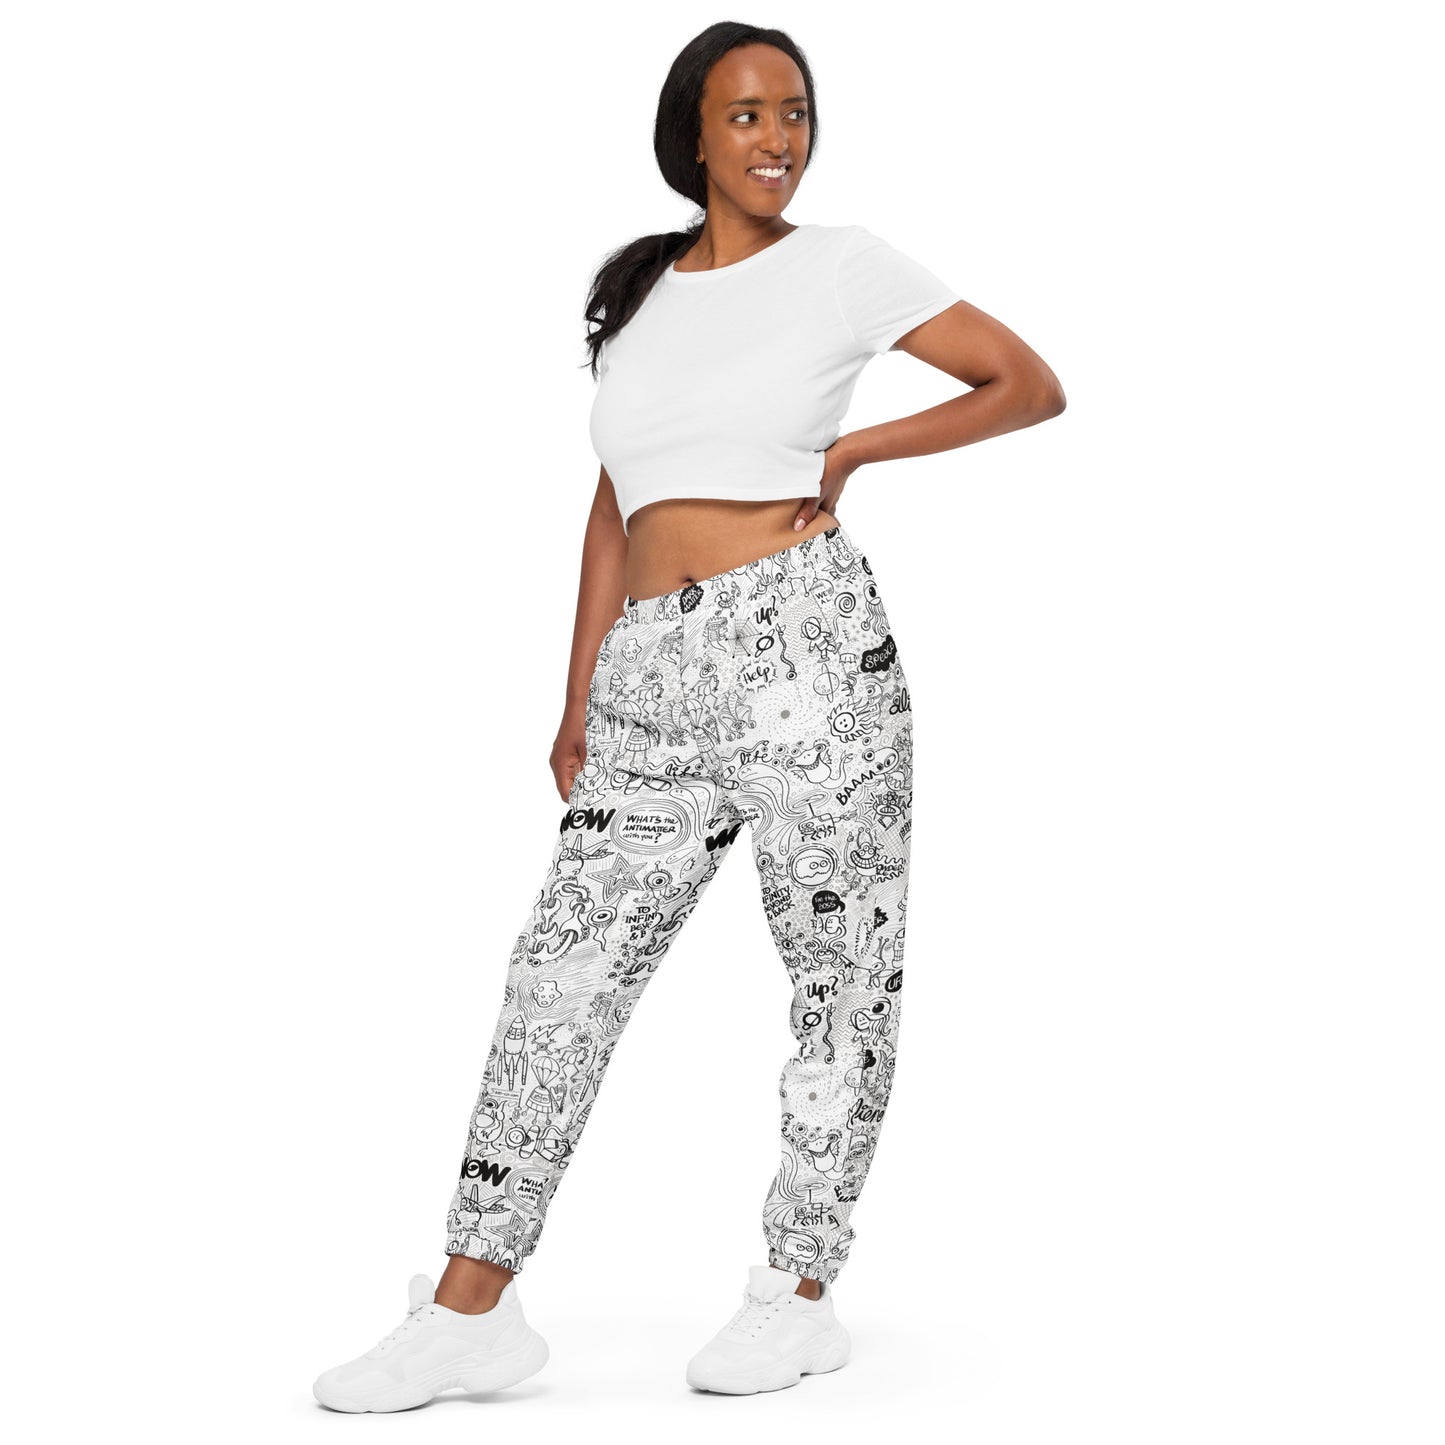 Celebrating the most comprehensive Doodle art of the universe - Unisex track pants. Side view